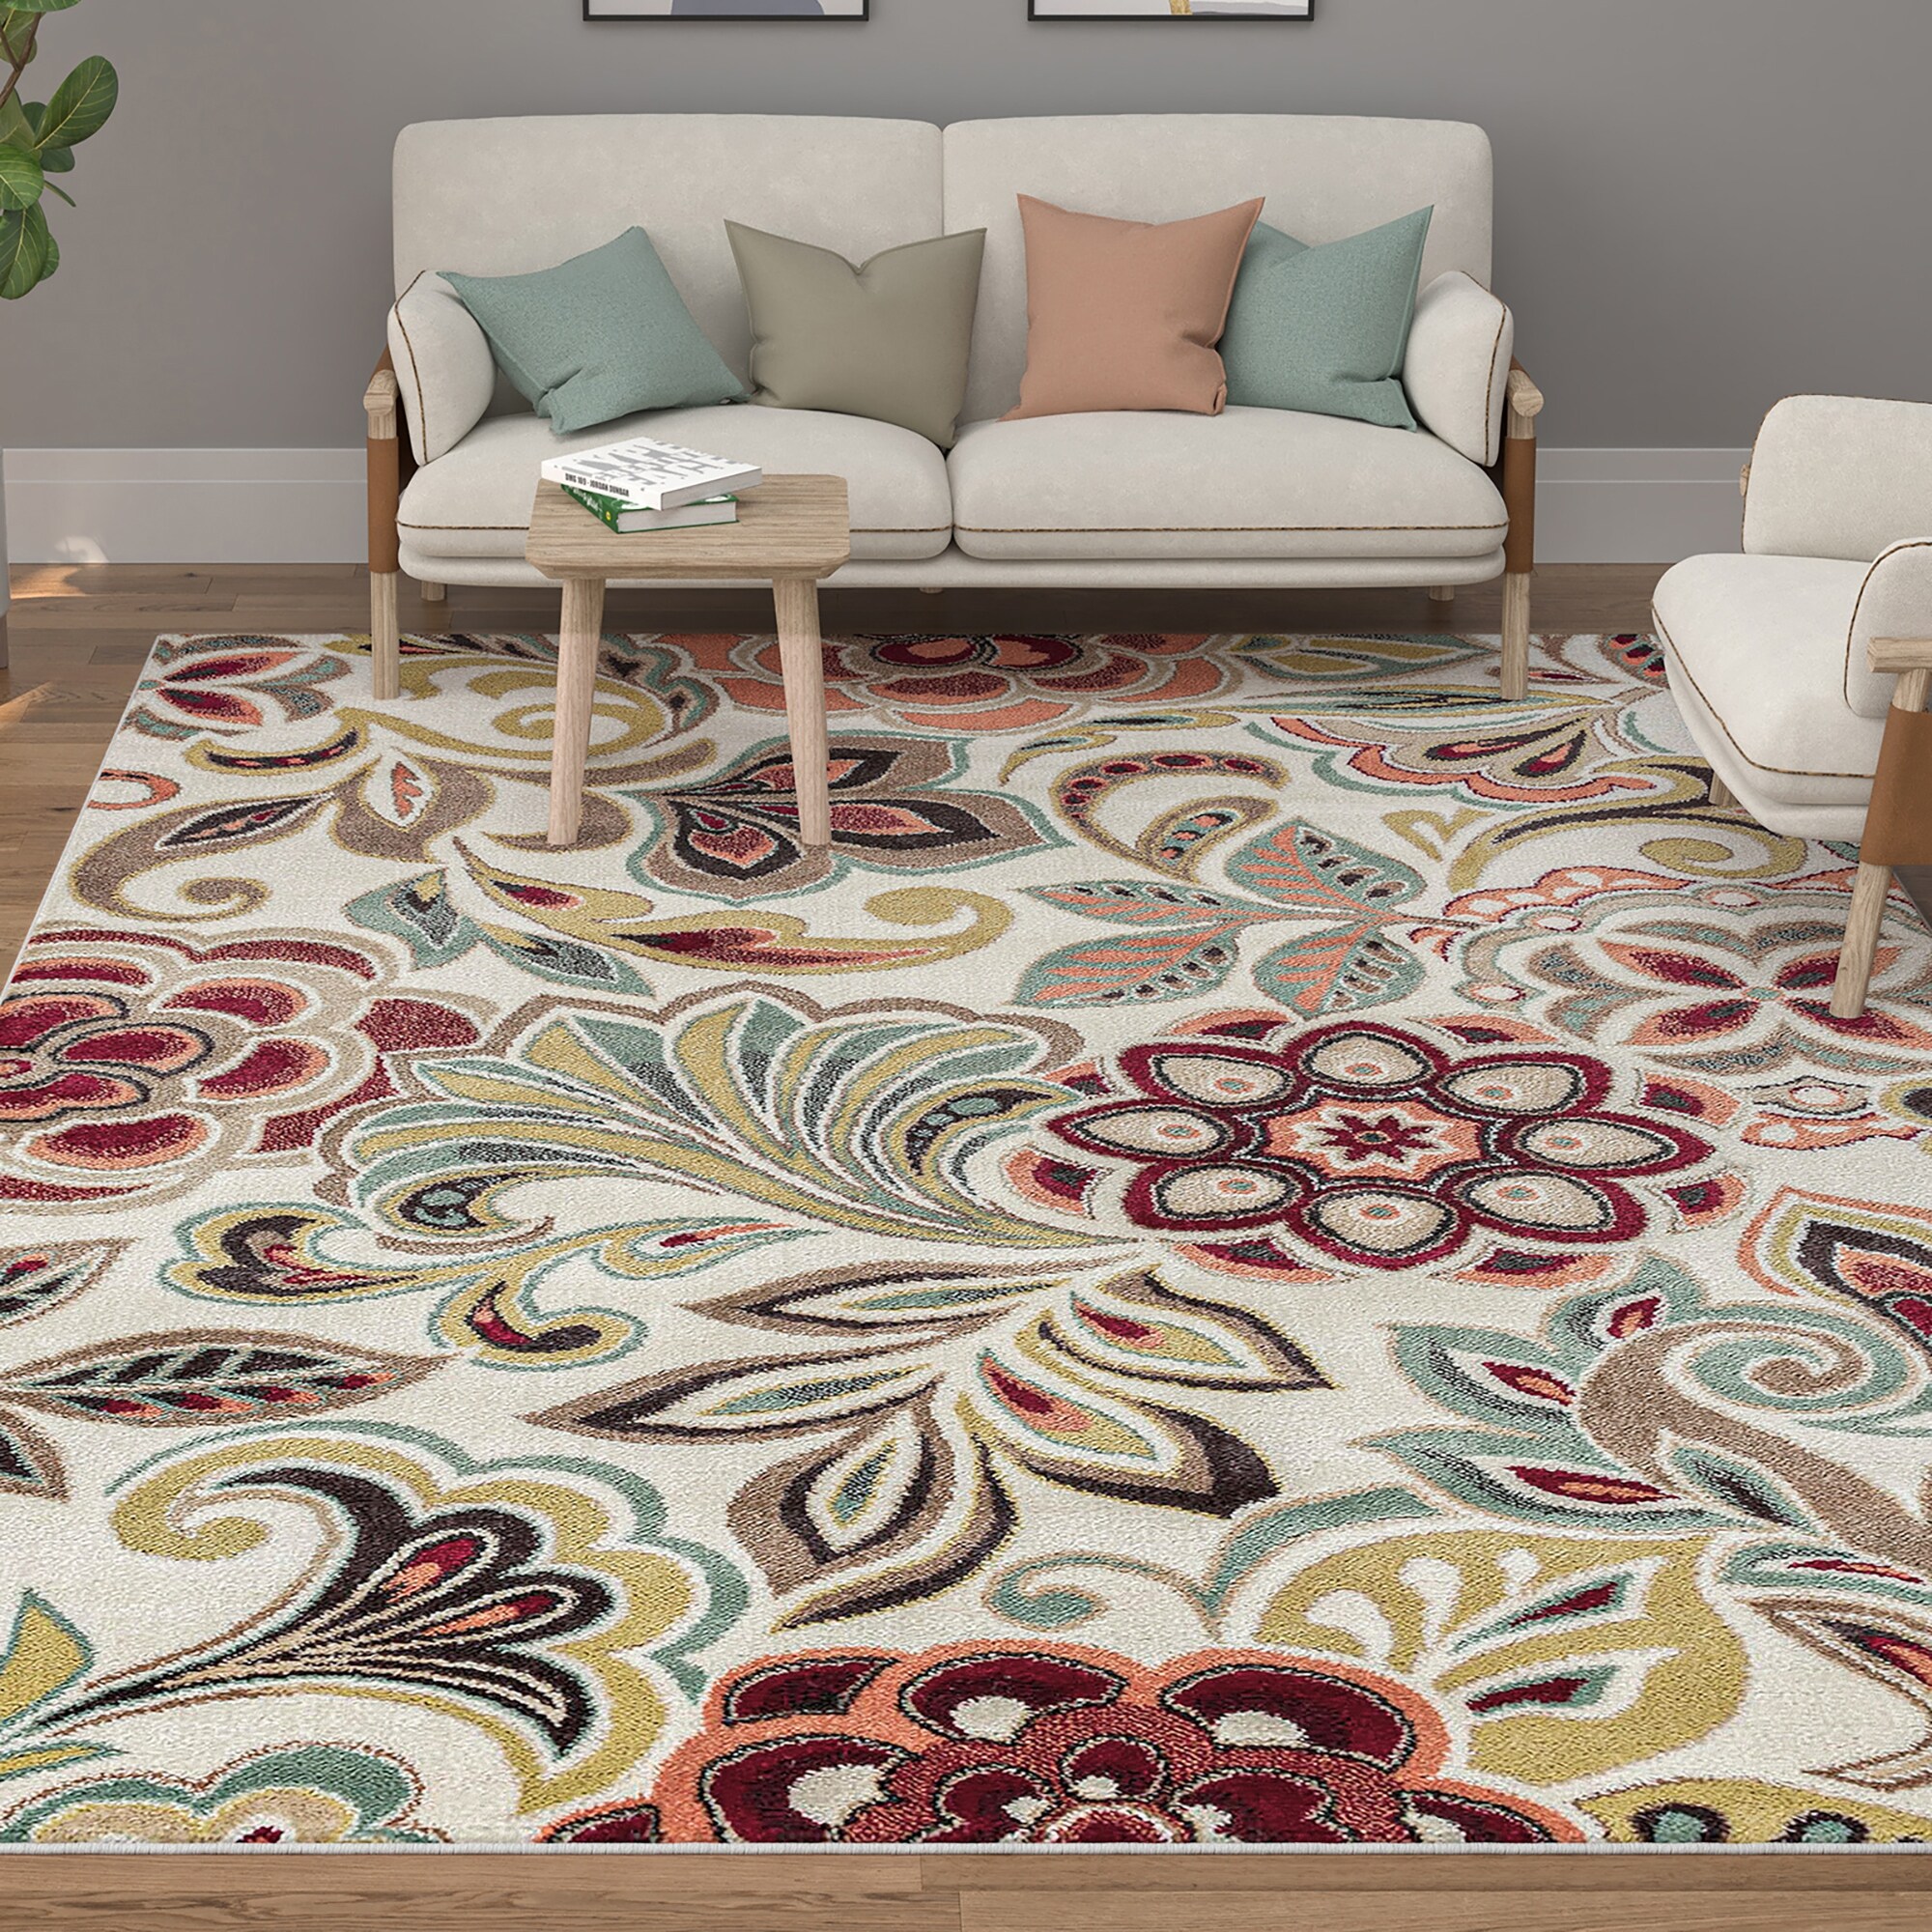 Alise Rugs Carrington Transitional Floral Area Rug Grey 7'6 x 9'10 Floral & Botanical 8' x 10' Indoor Living Room Dining Room Cream Bedroom